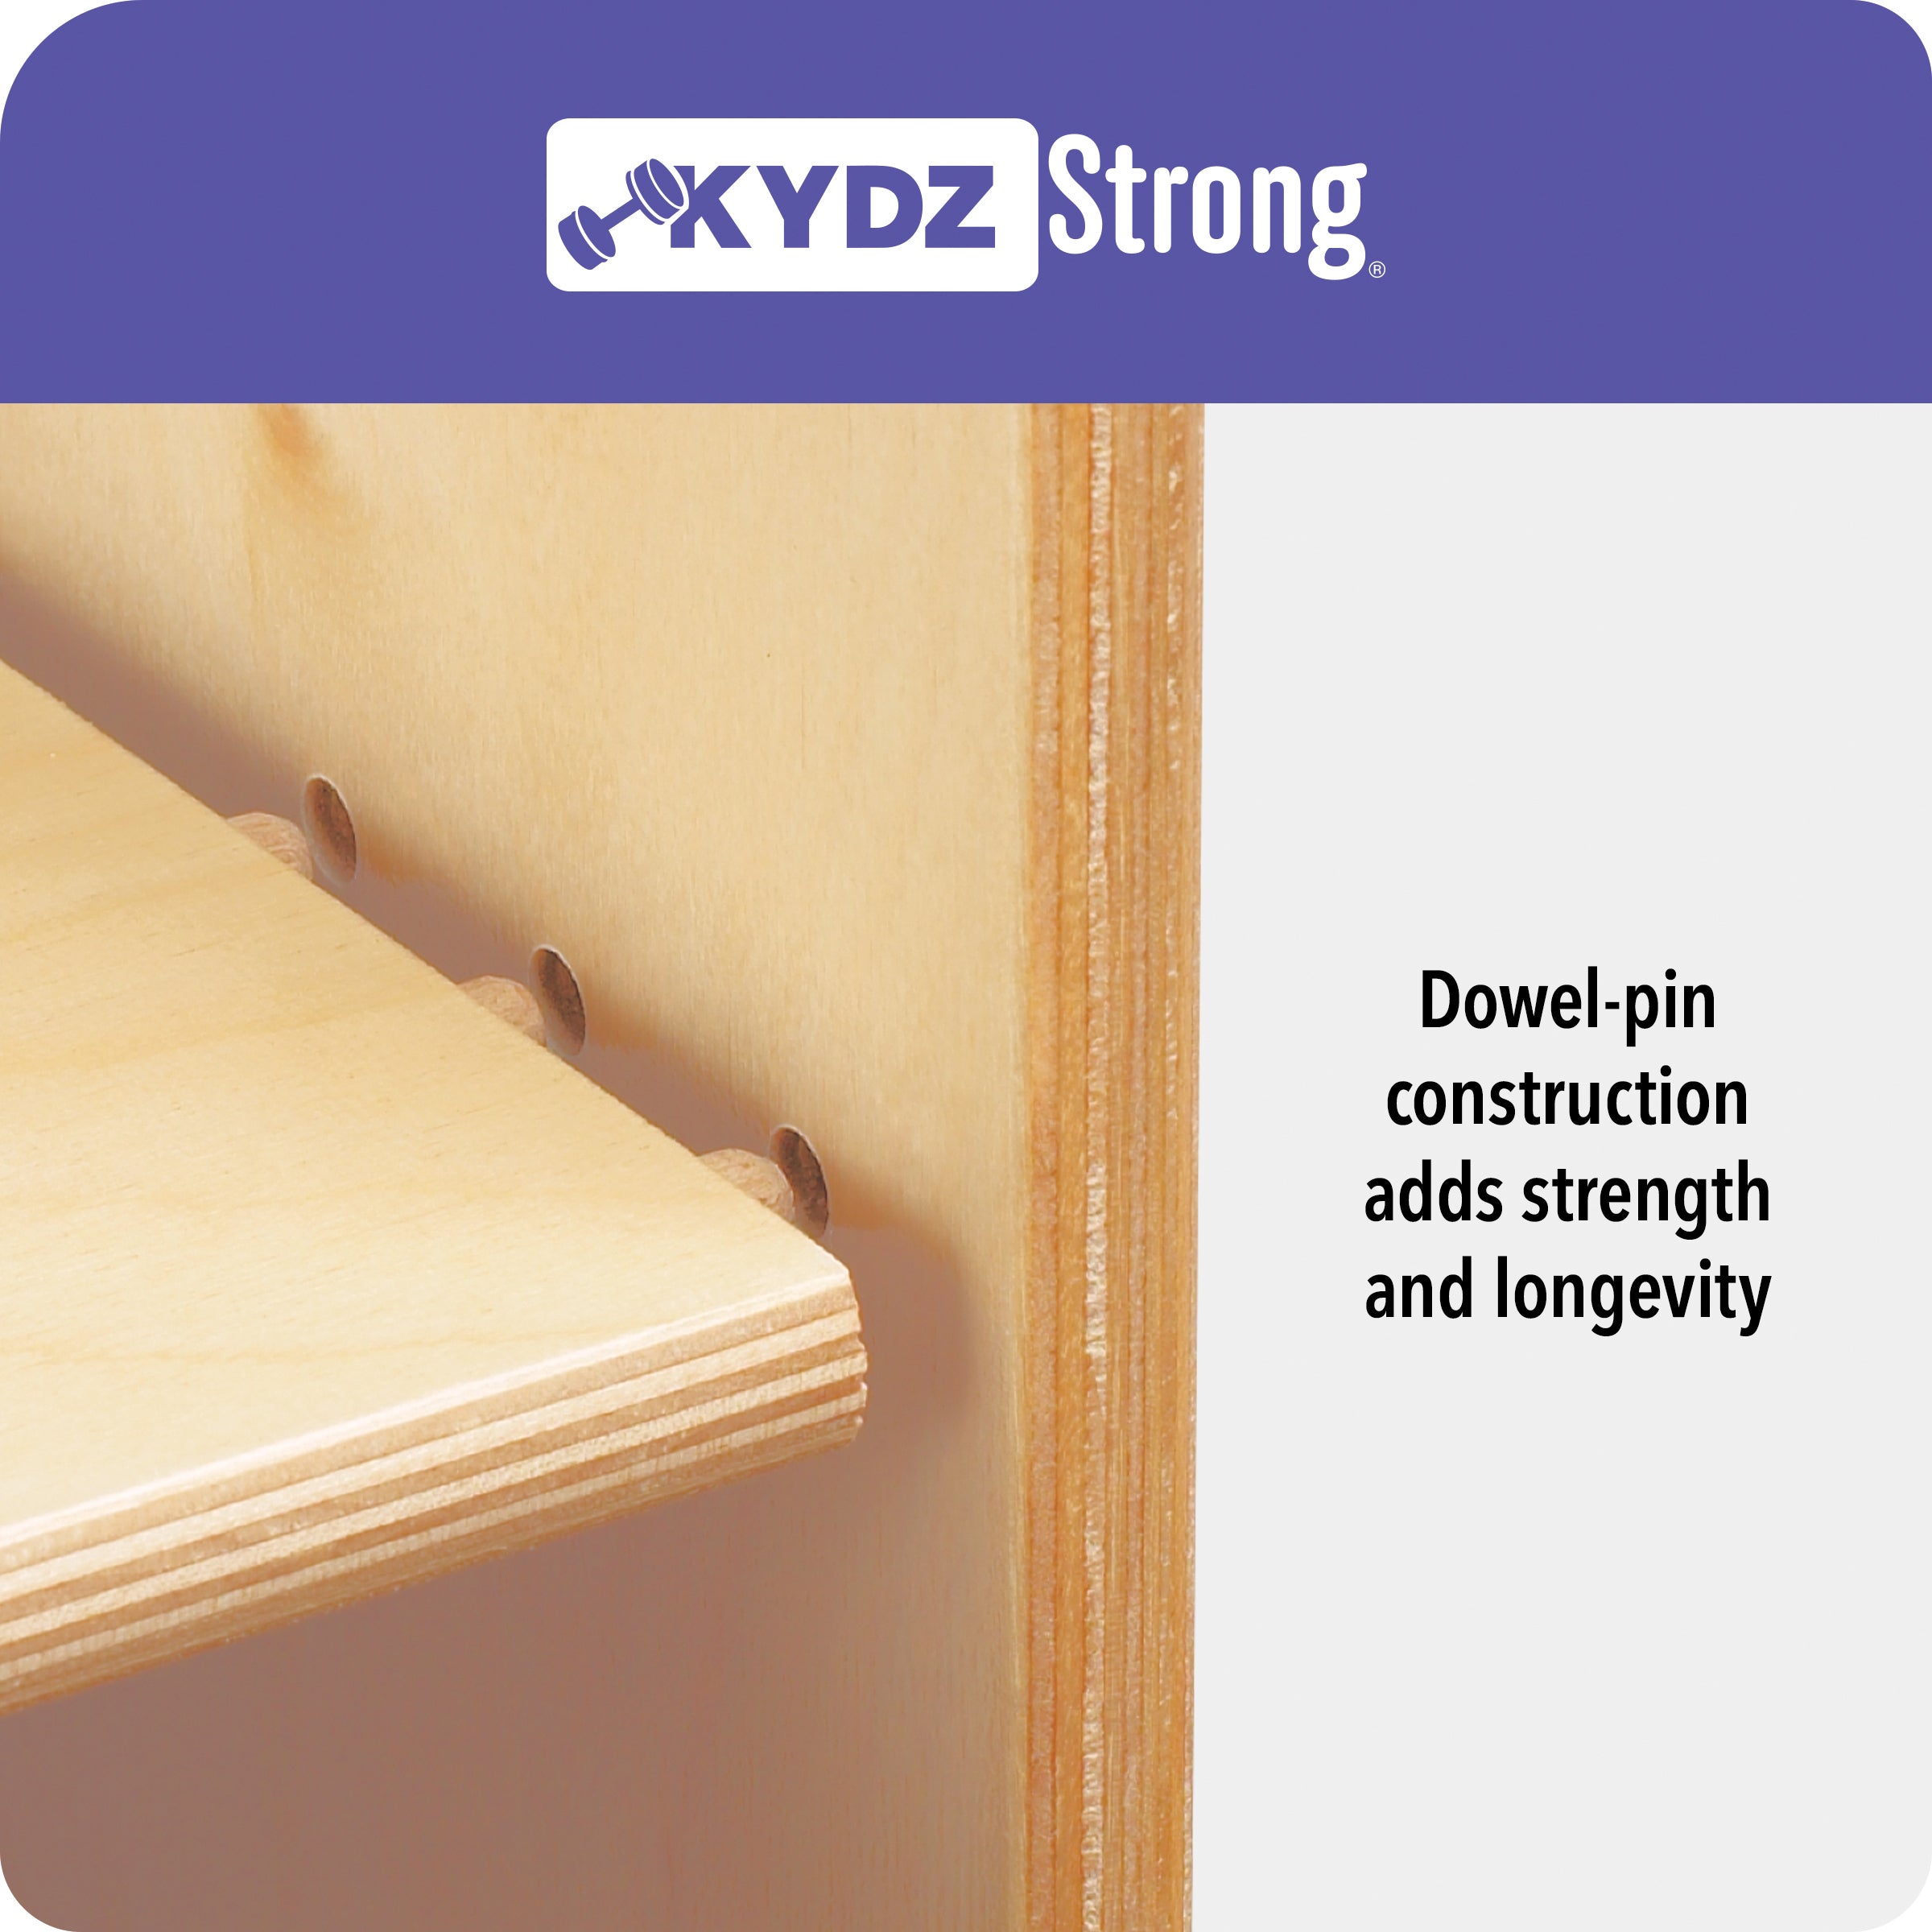 KYDZStrong_feature_dowel